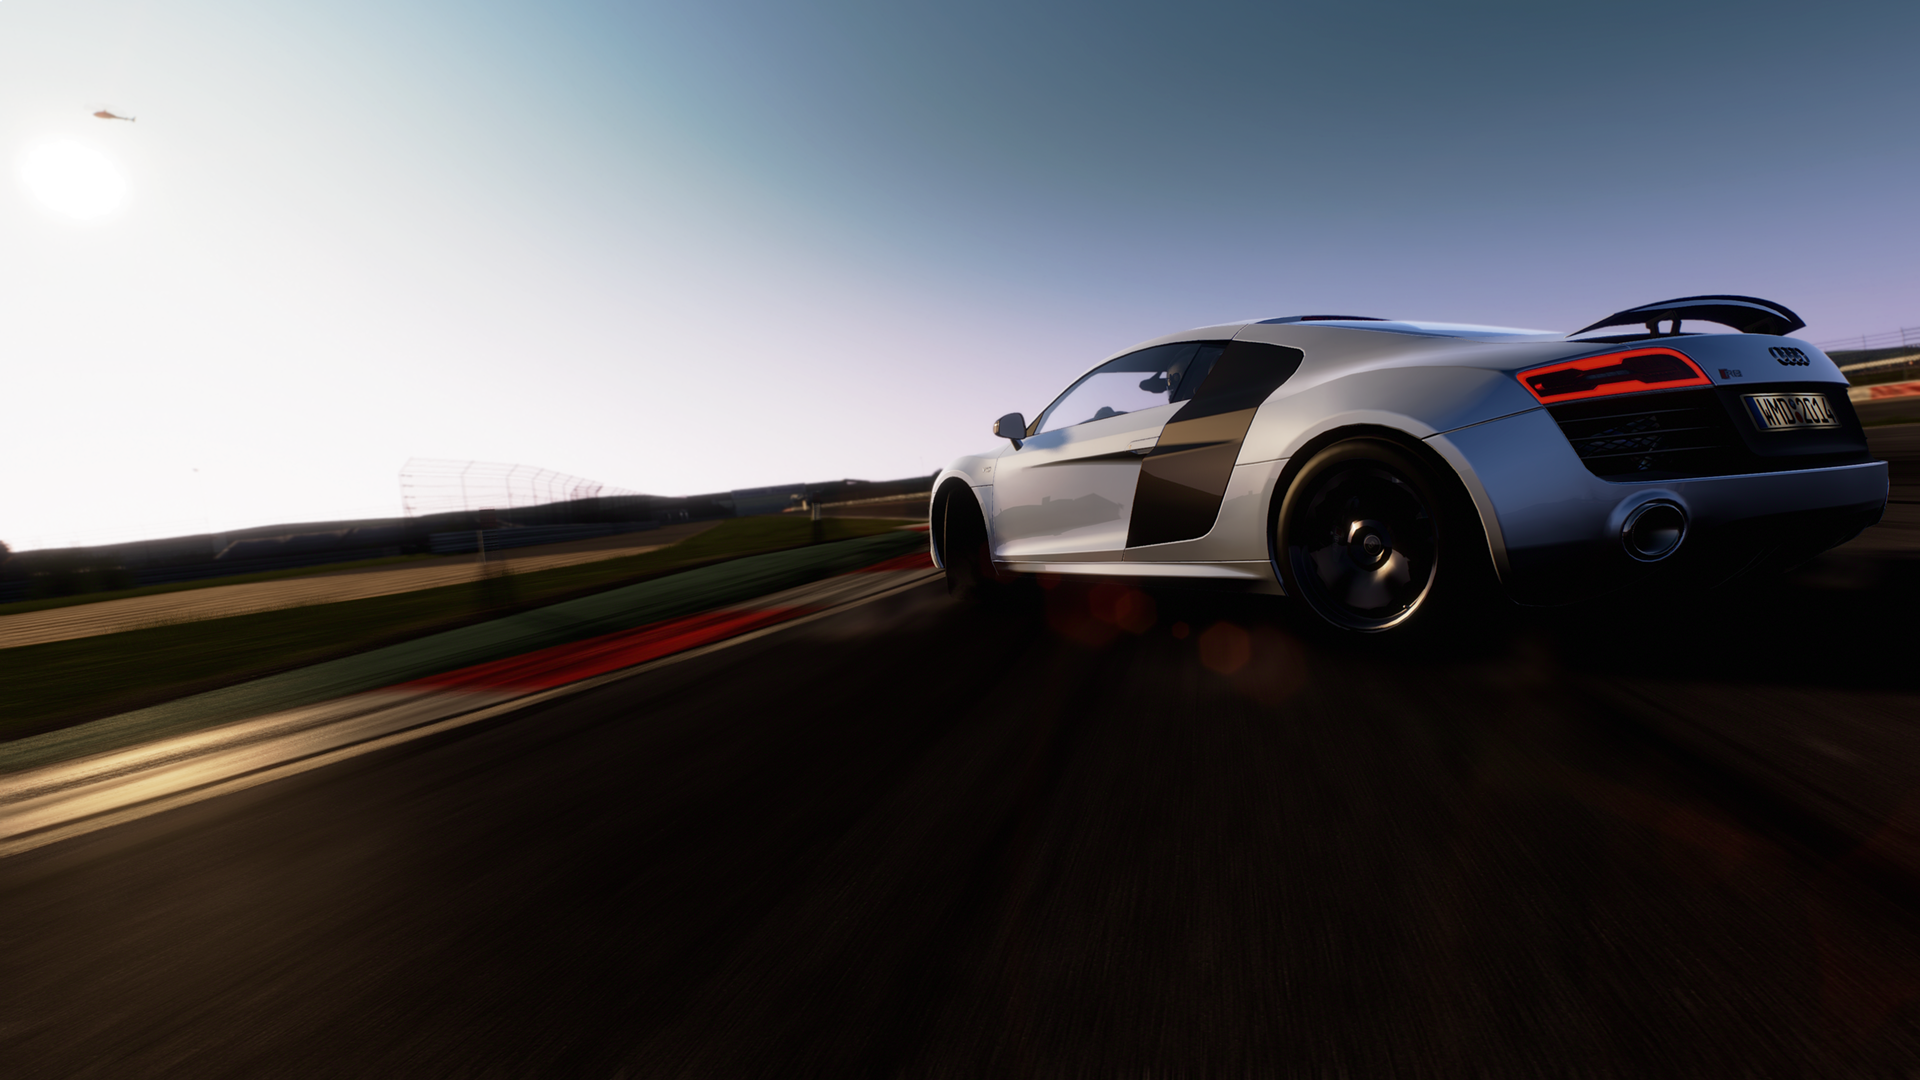 pcars_exe_dx11_20140425_105300_by_roderickartist-d7fxh2w.png